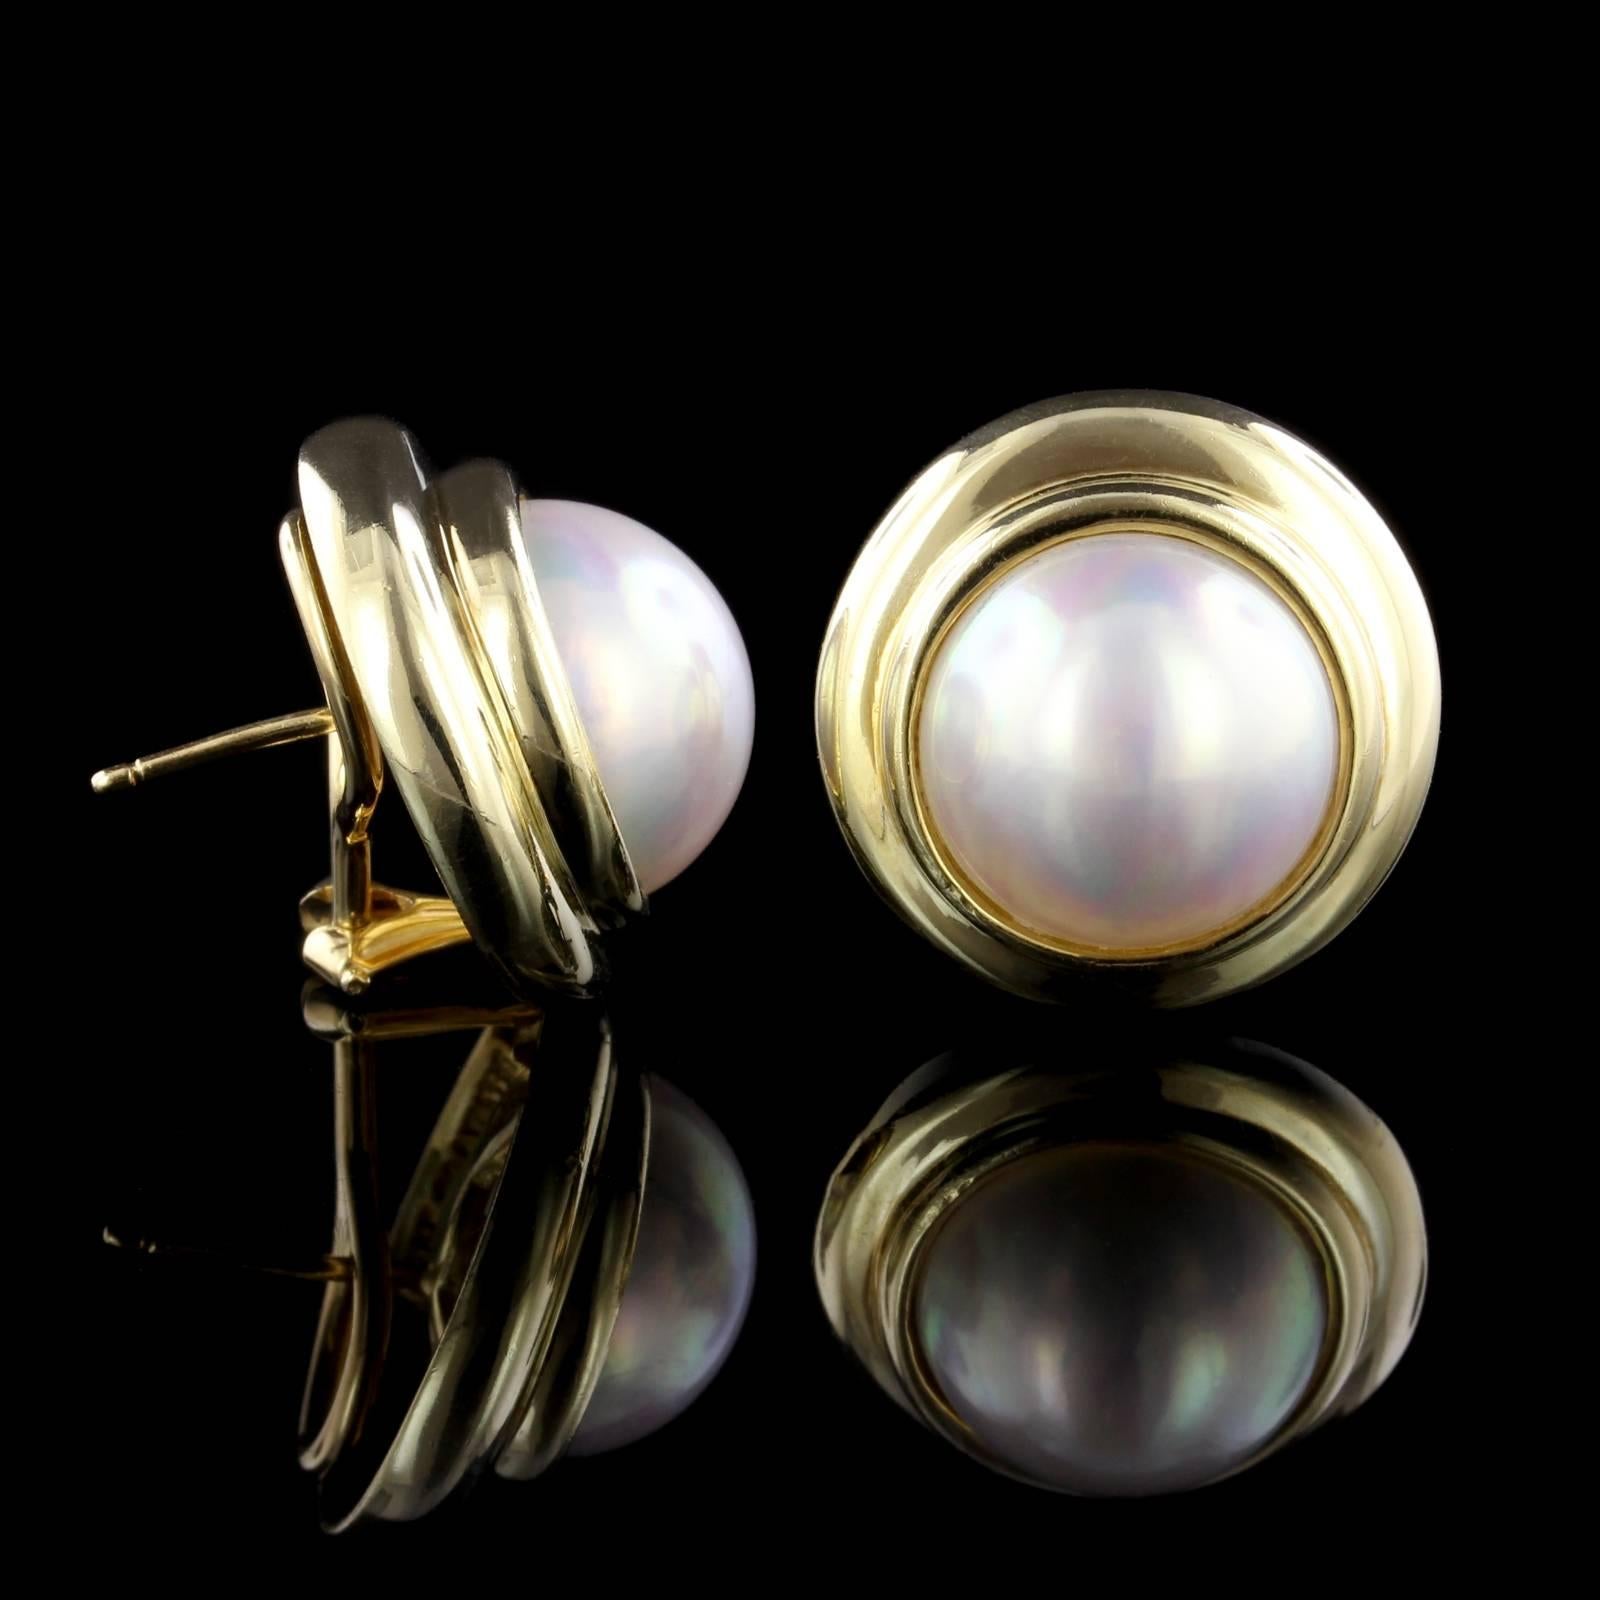 Tiffany & Co. 18K Yellow Gold Mabe Pearl Earrings. The earrings are bezel set with two mabe pearls each measuring 13.50mm., diameter 3/4